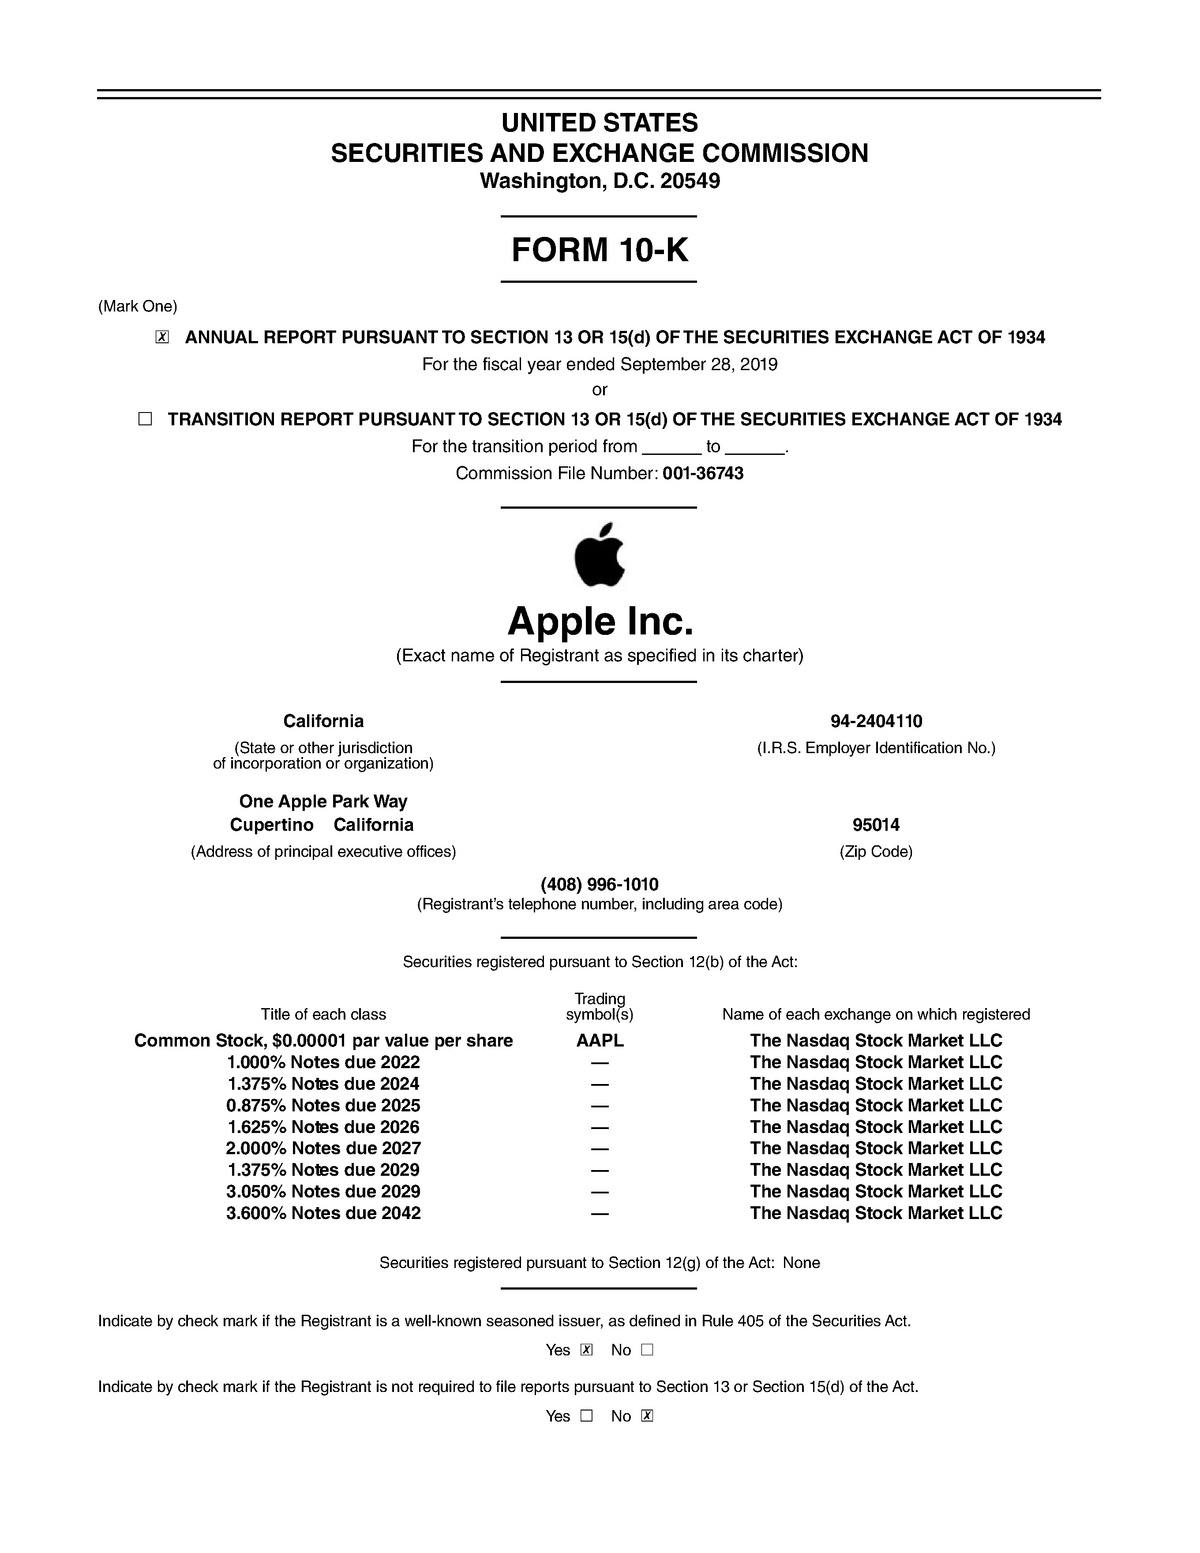 Apple financial statements copy UNITED STATES SECURITIES AND EXCHANGE